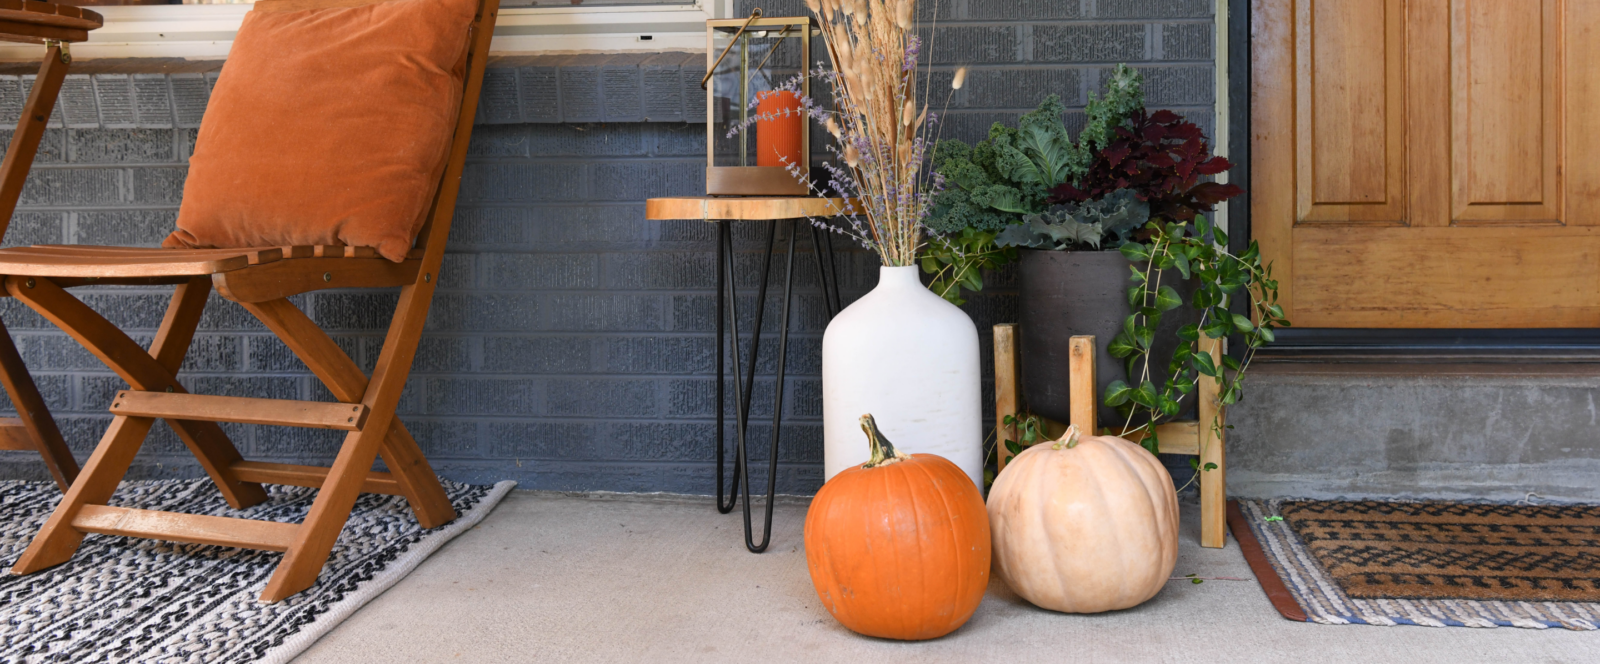 Image of a front porch decorated for fall with pumpkings and a vase with dried plants.